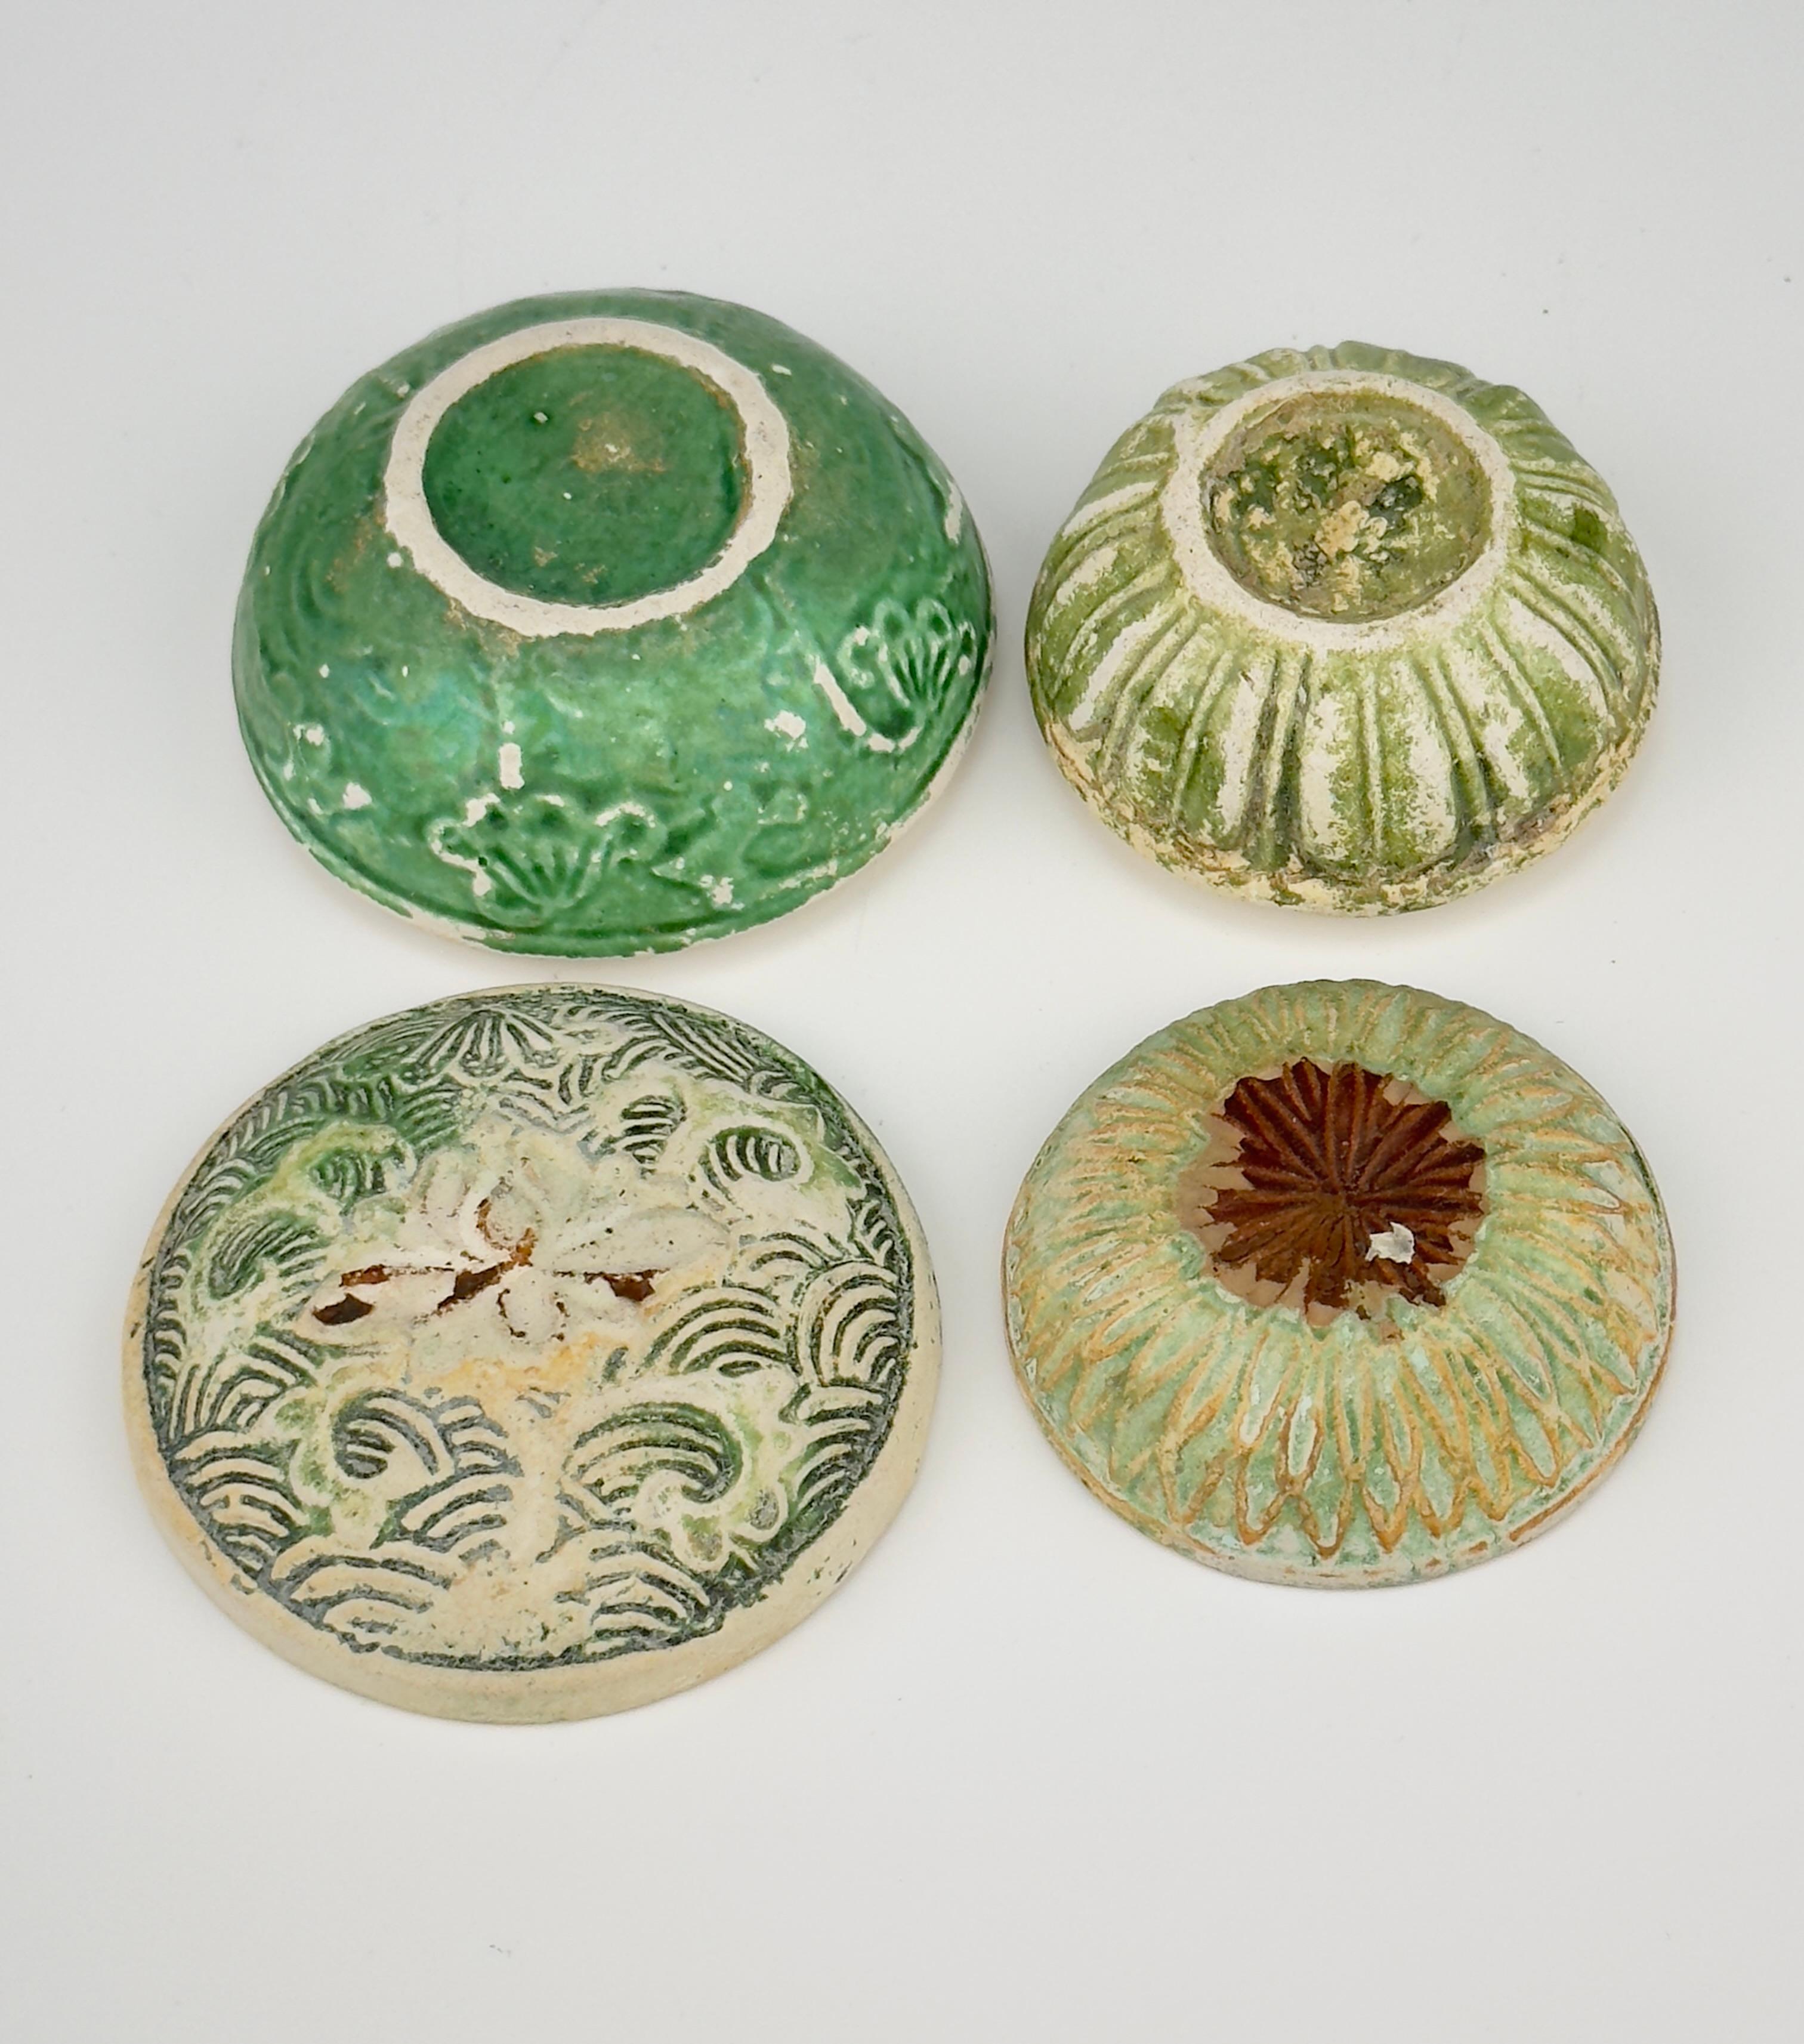 Swatow Lidded Boxes in the shape of Waves and Flowers, Late Ming Era(16-17th c) For Sale 1